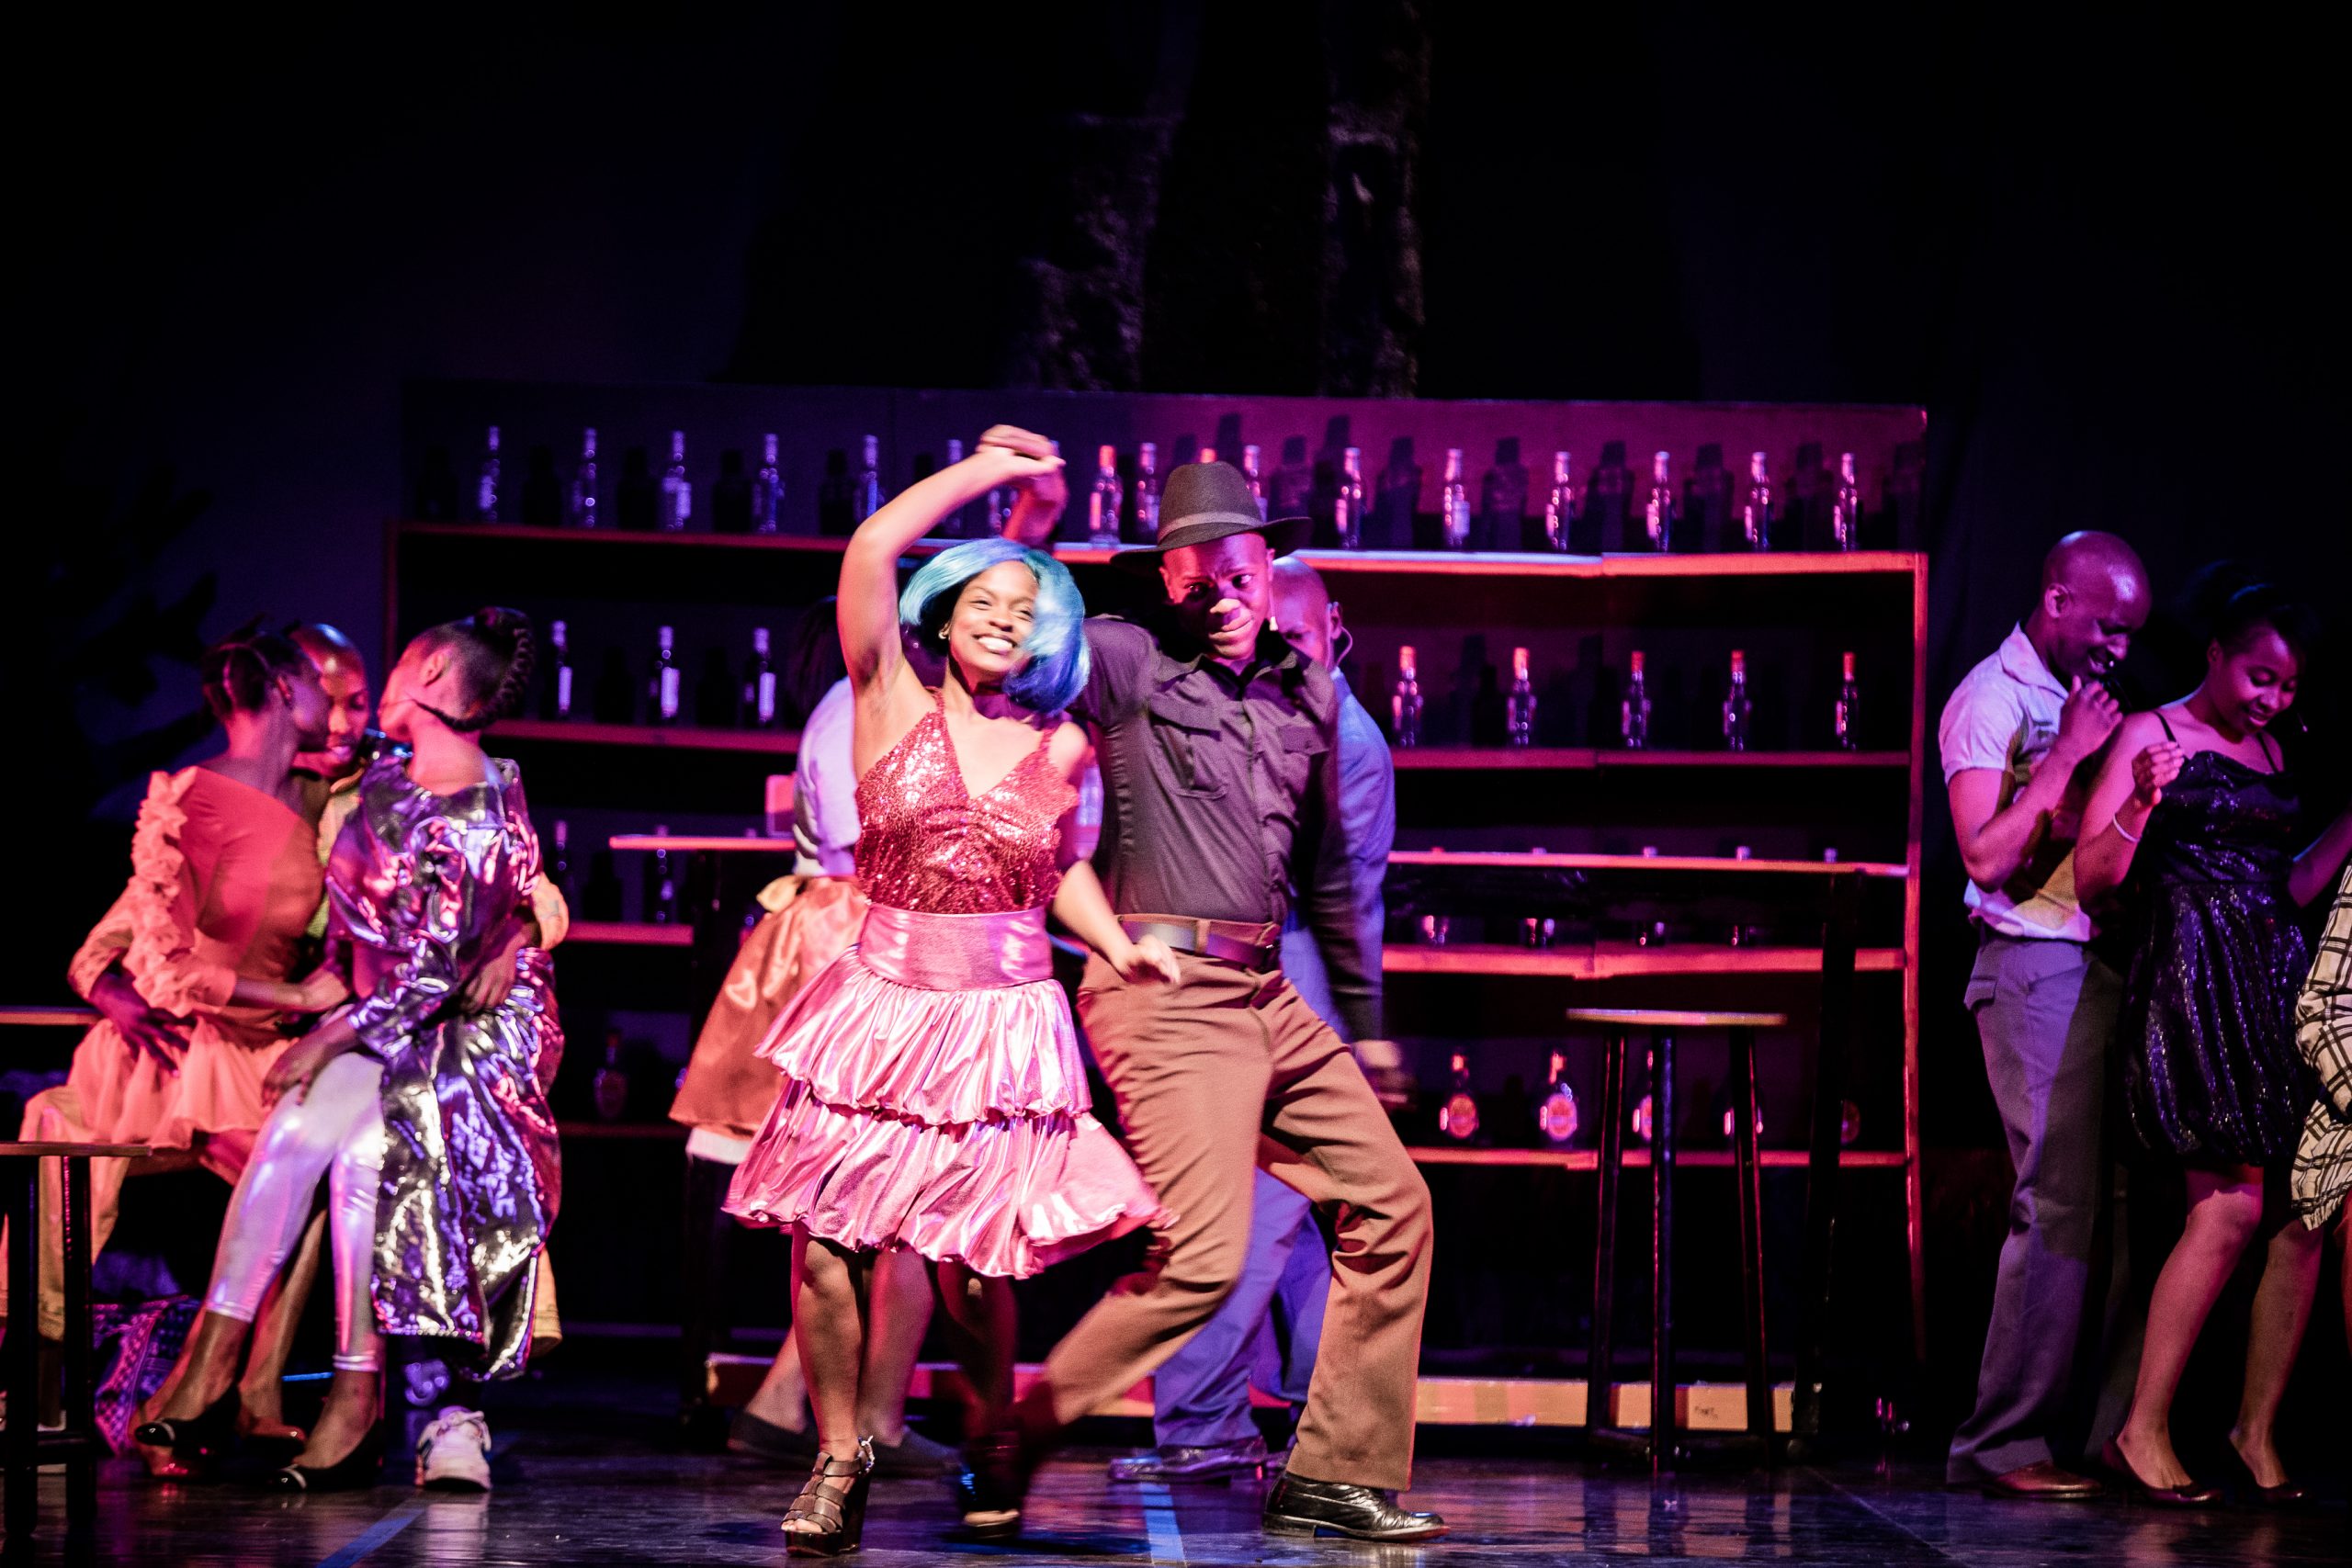 Subira, A New Musical opened on Friday, 30th of July 2021 at Kenya National Theatre (Photos by Ignacio Hennigs)